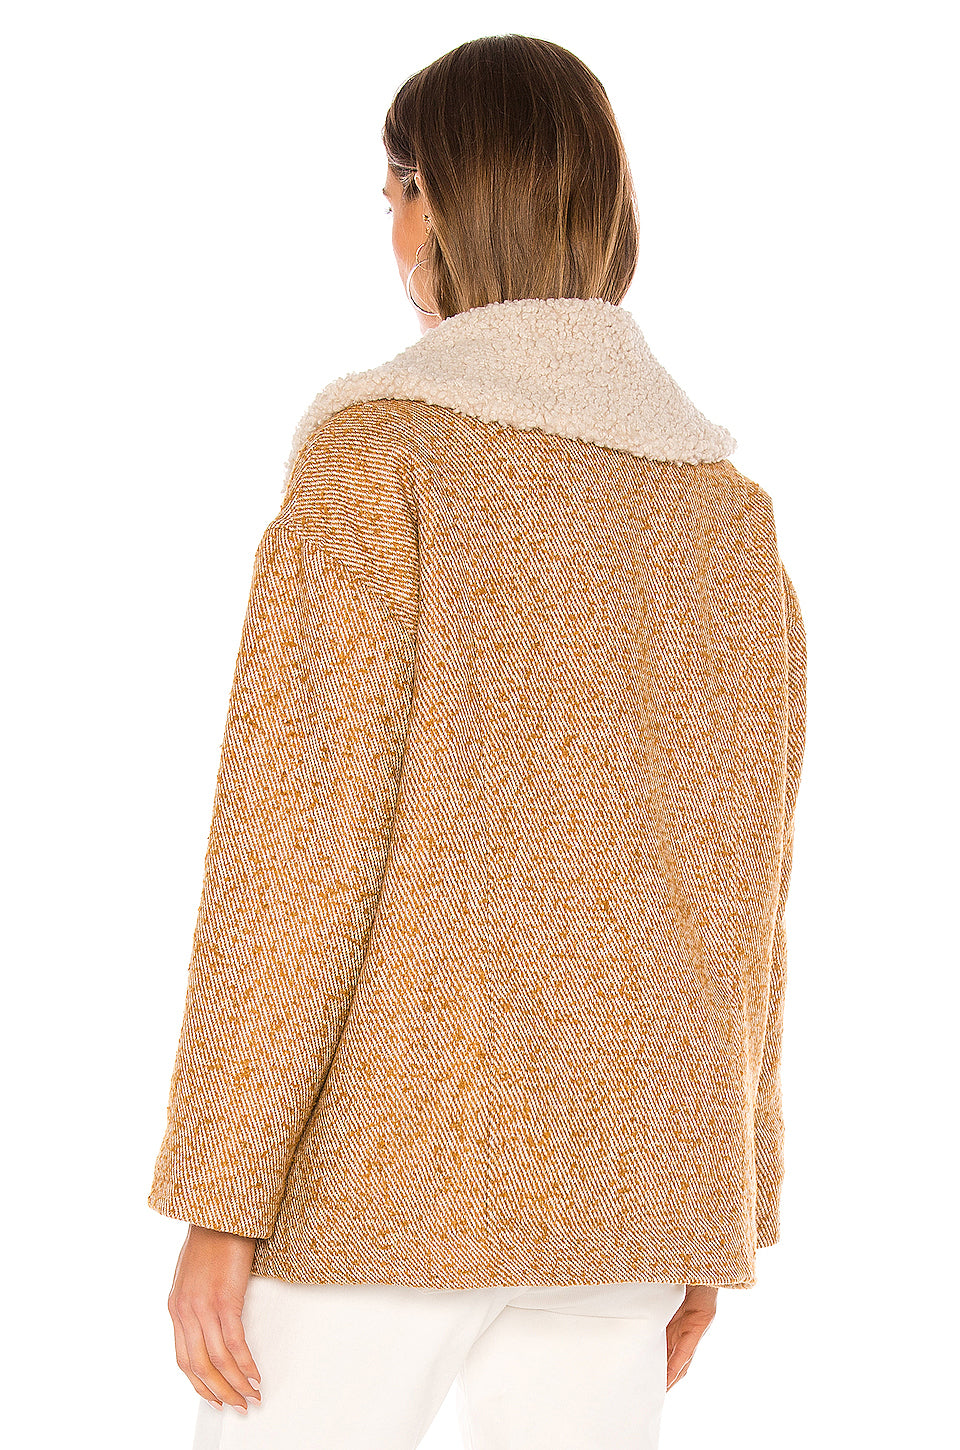 Bette Oversized Jacket in ANTIQUE YELLOW